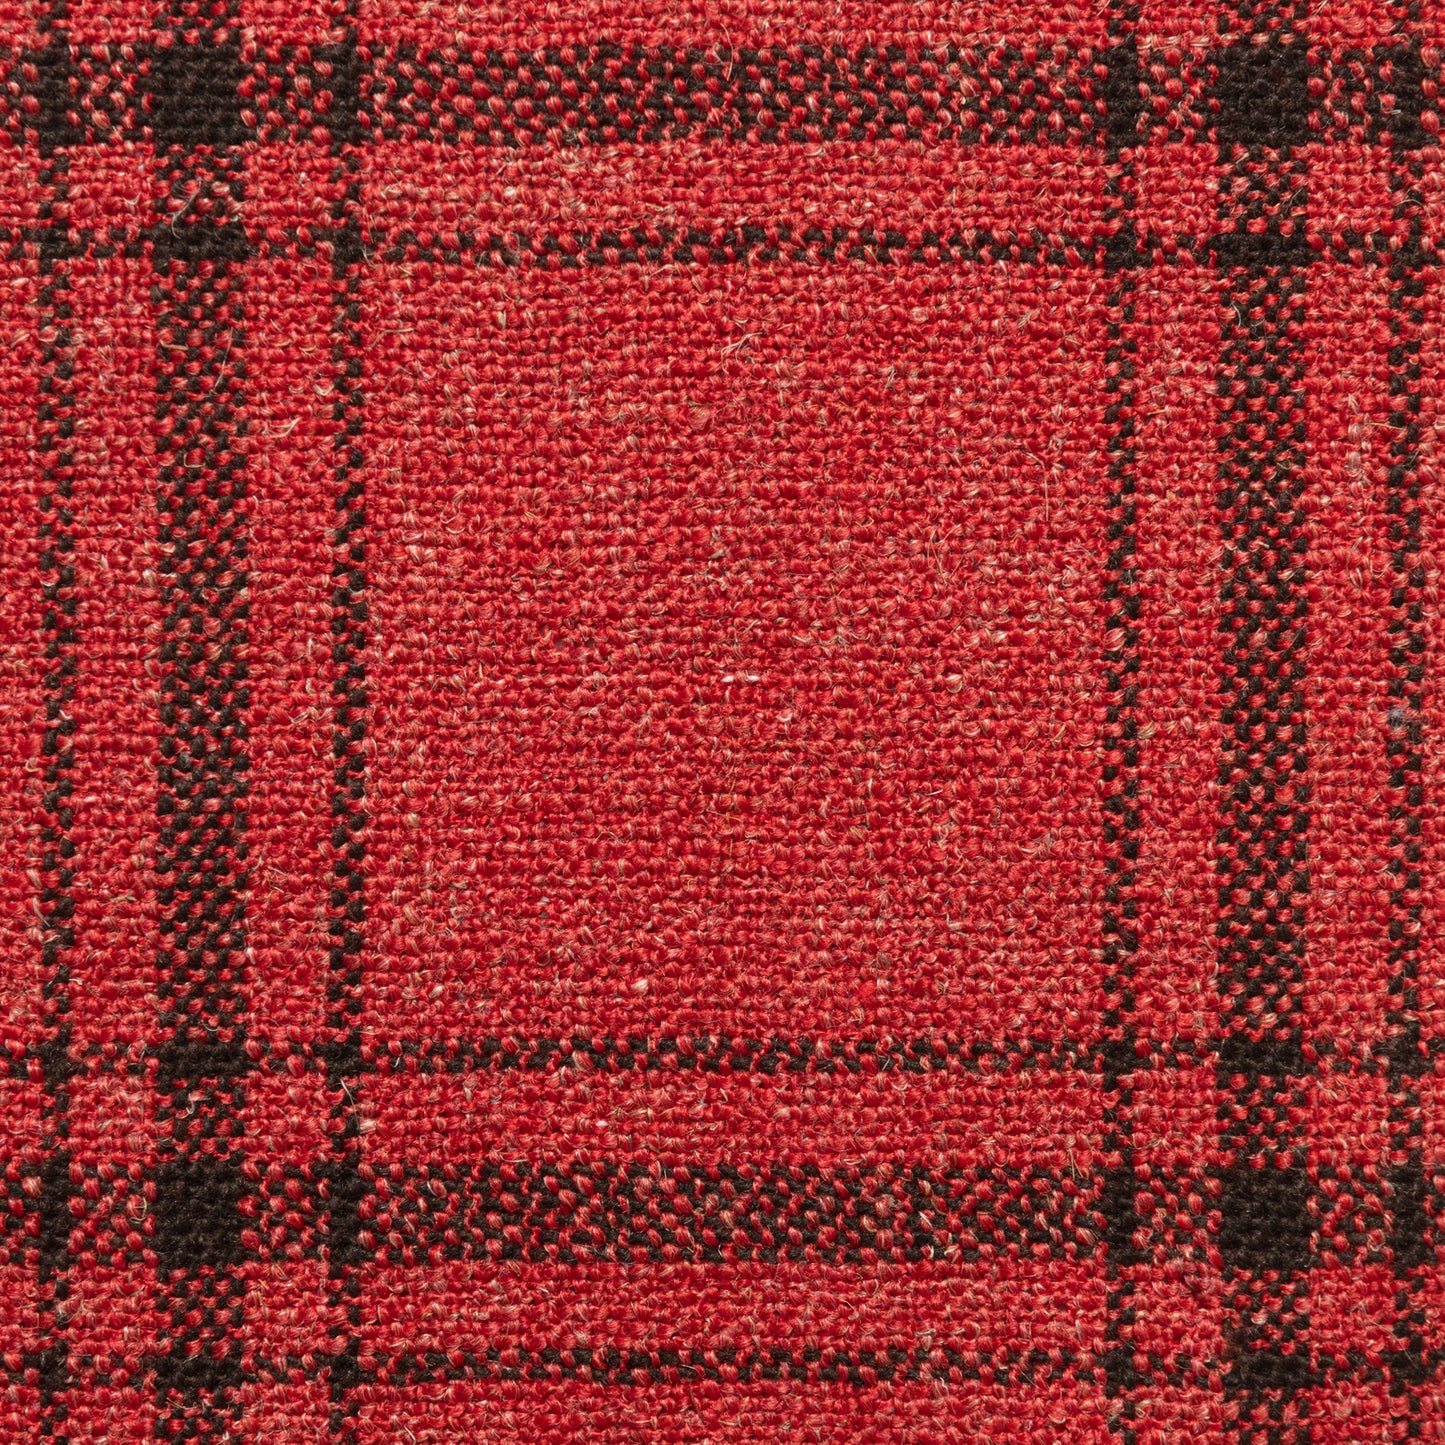 #016 RED AND BLACK PLAID